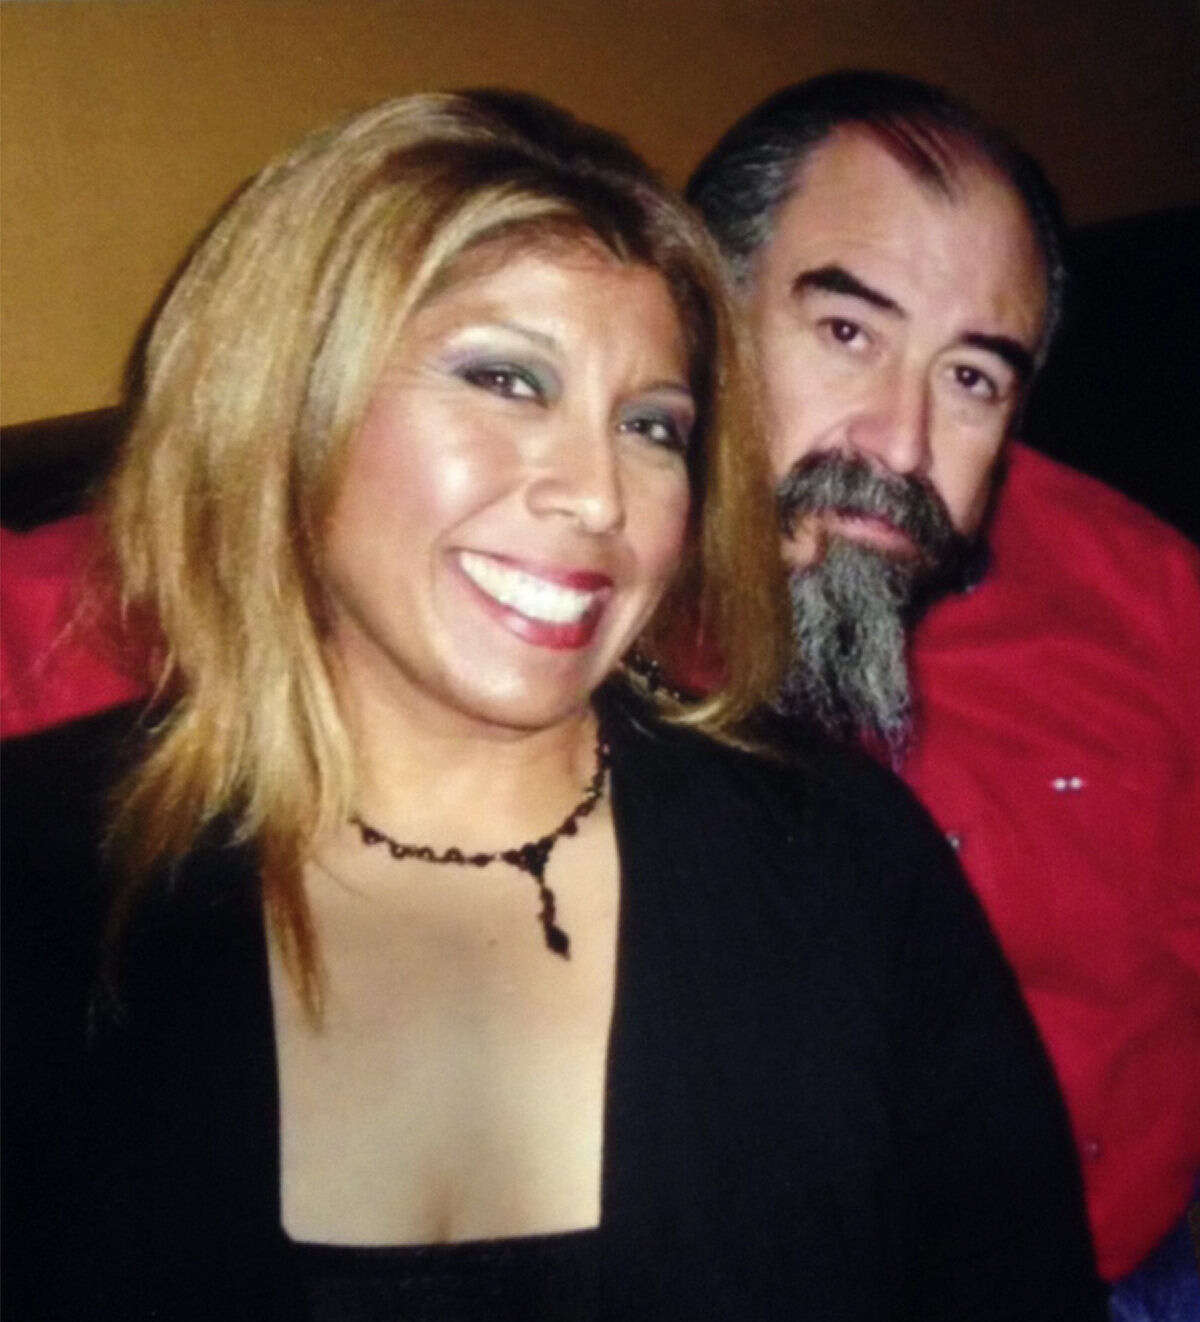 Pedro “Peter” Tenorio was killed in 2012 when a vehicle slammed into his Harley- Davidson. His wife suffered serious injuries.